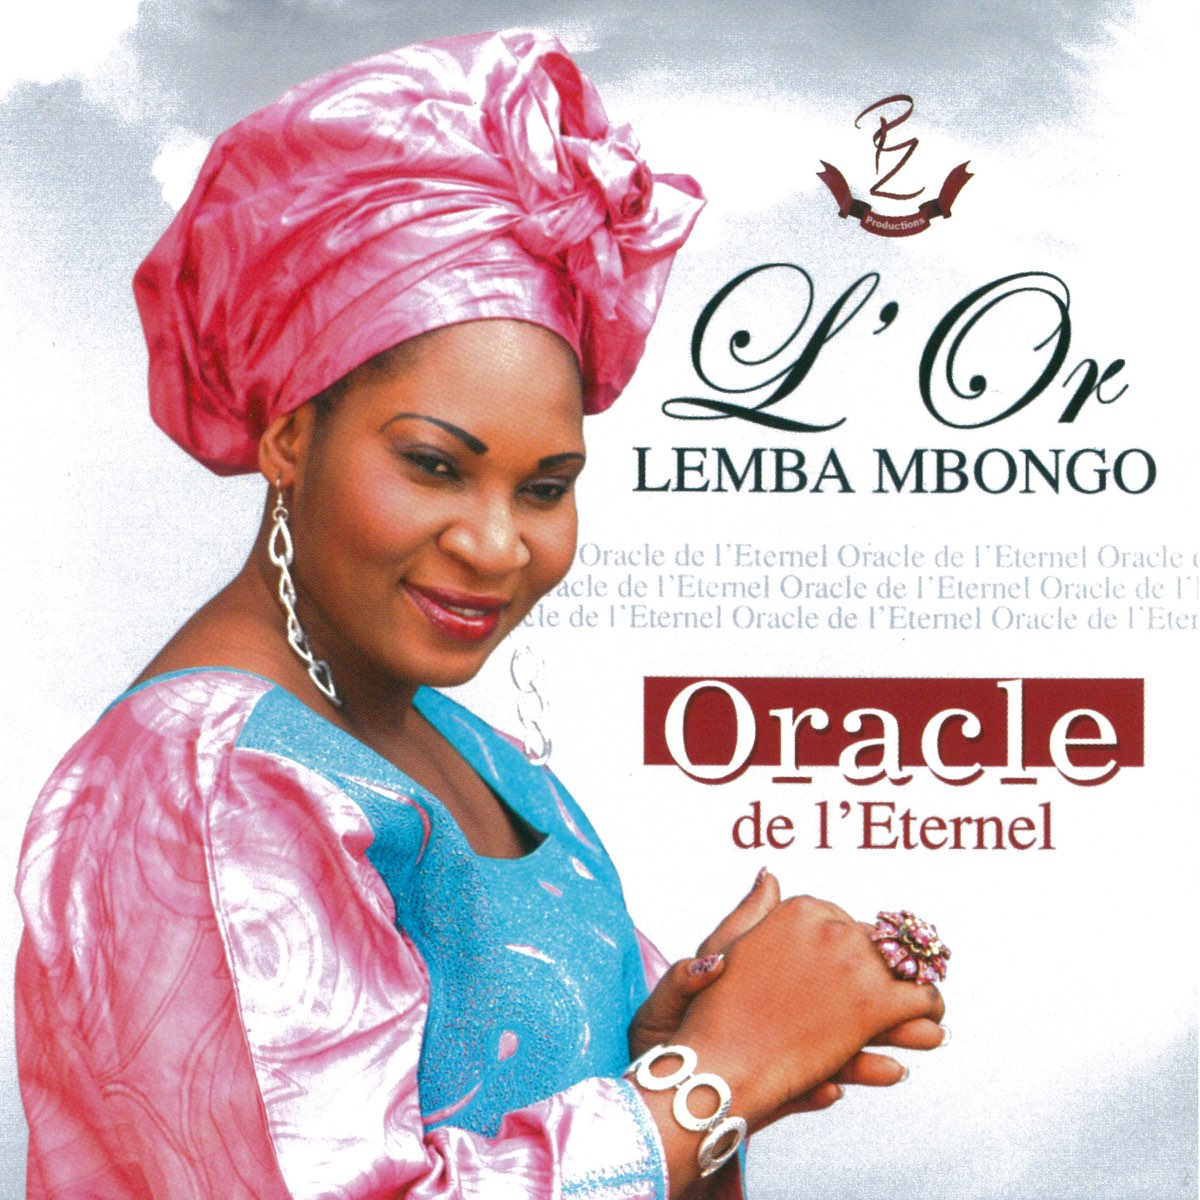 Oracle de l'Eternel by L'or Lemba Mbongo on Apple Music